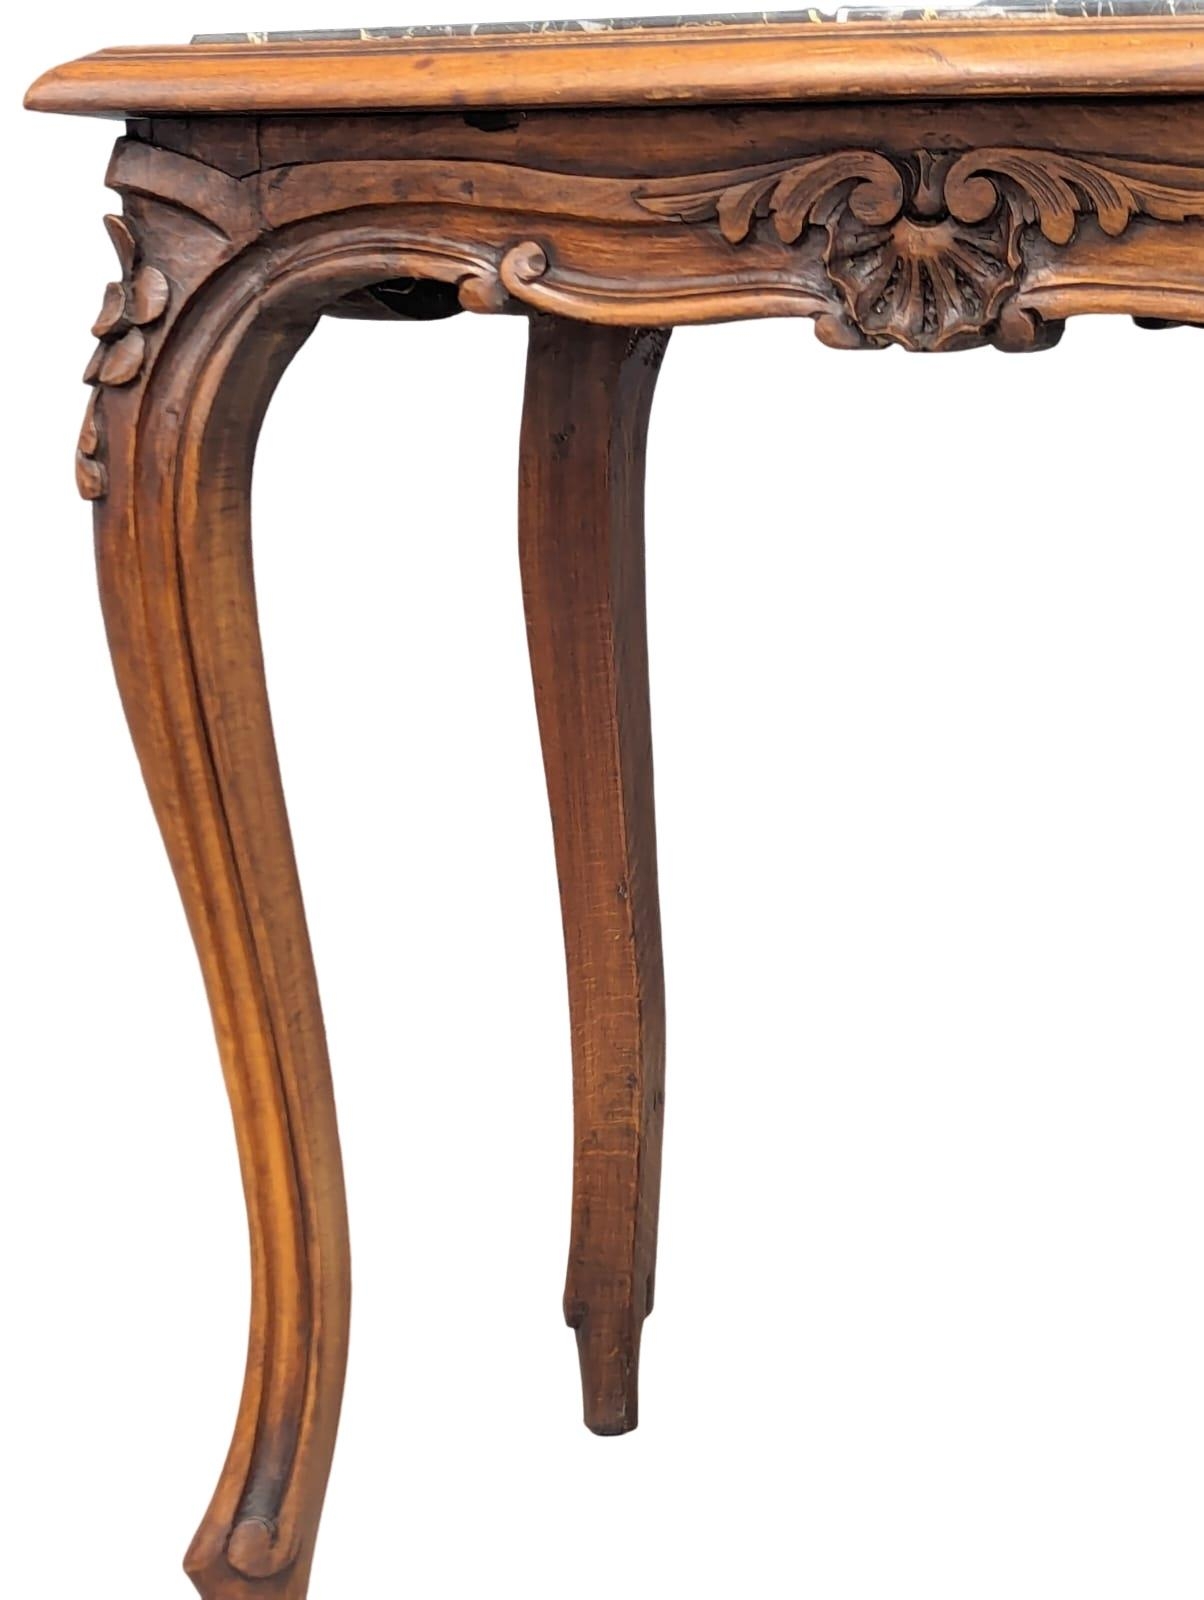 A French Provincial style walnut side table with marble top and cabriole legs, circa 1900. 57cm x - Image 3 of 4